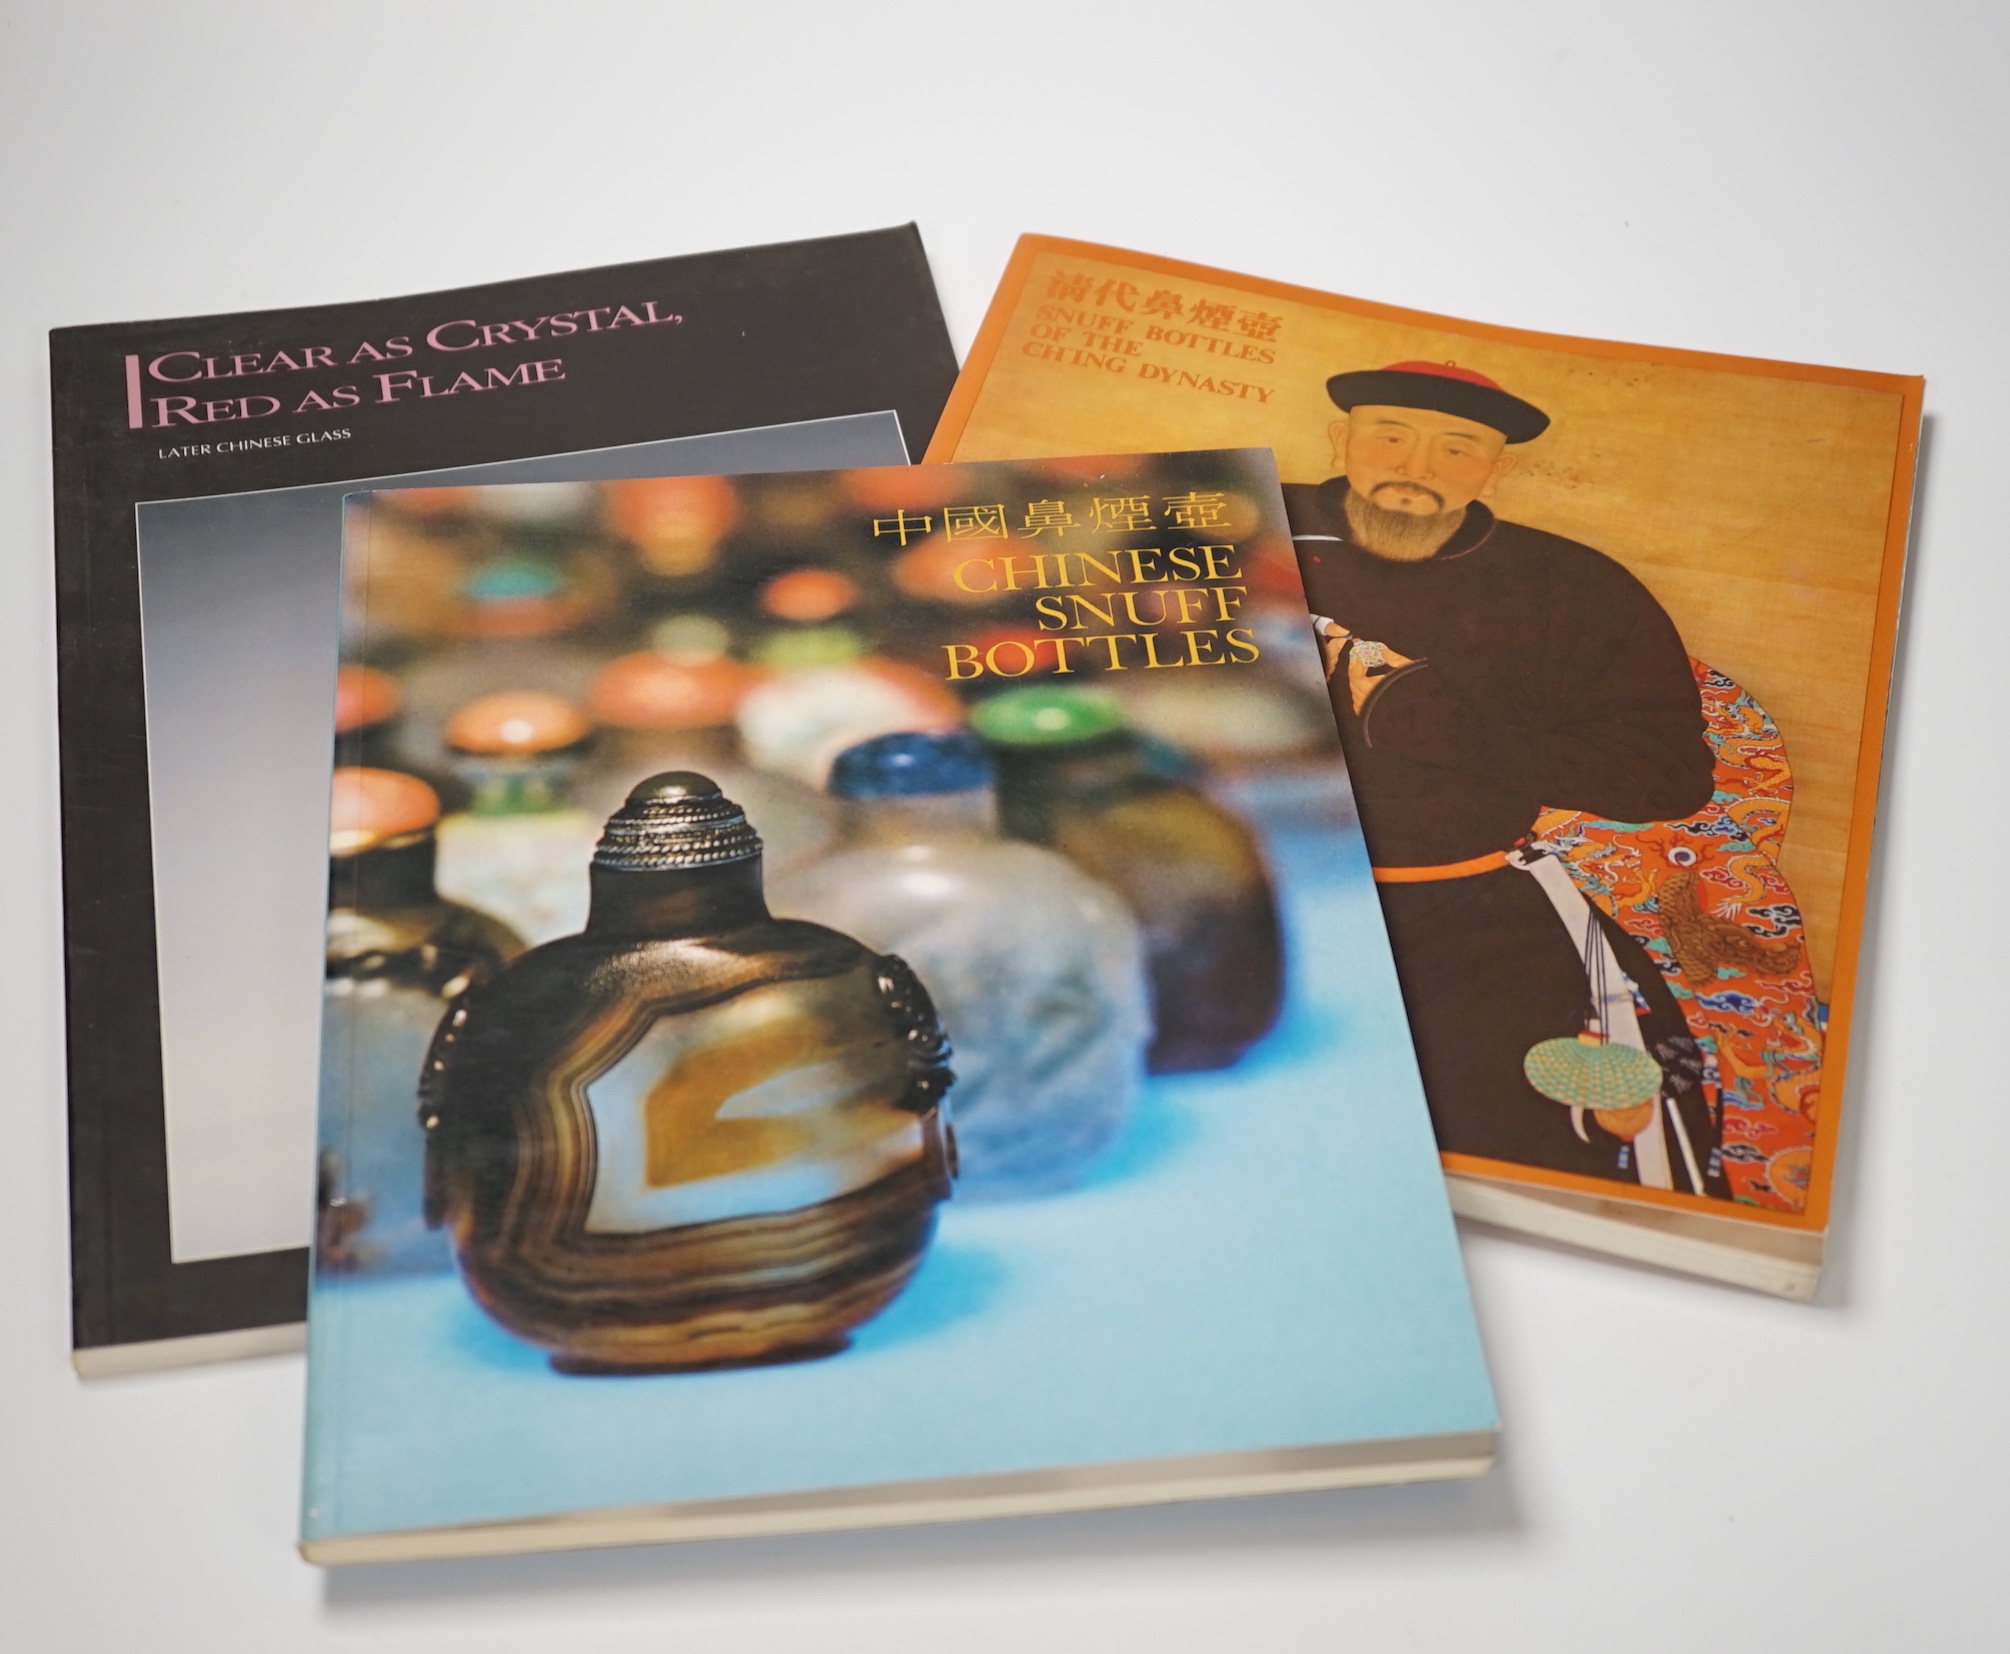 Three reference books comprising Clear as Crystal, Later Chinese Glass, Snuff bottles of the Ch’ing Dynasty and Chinese Snuff Bottles